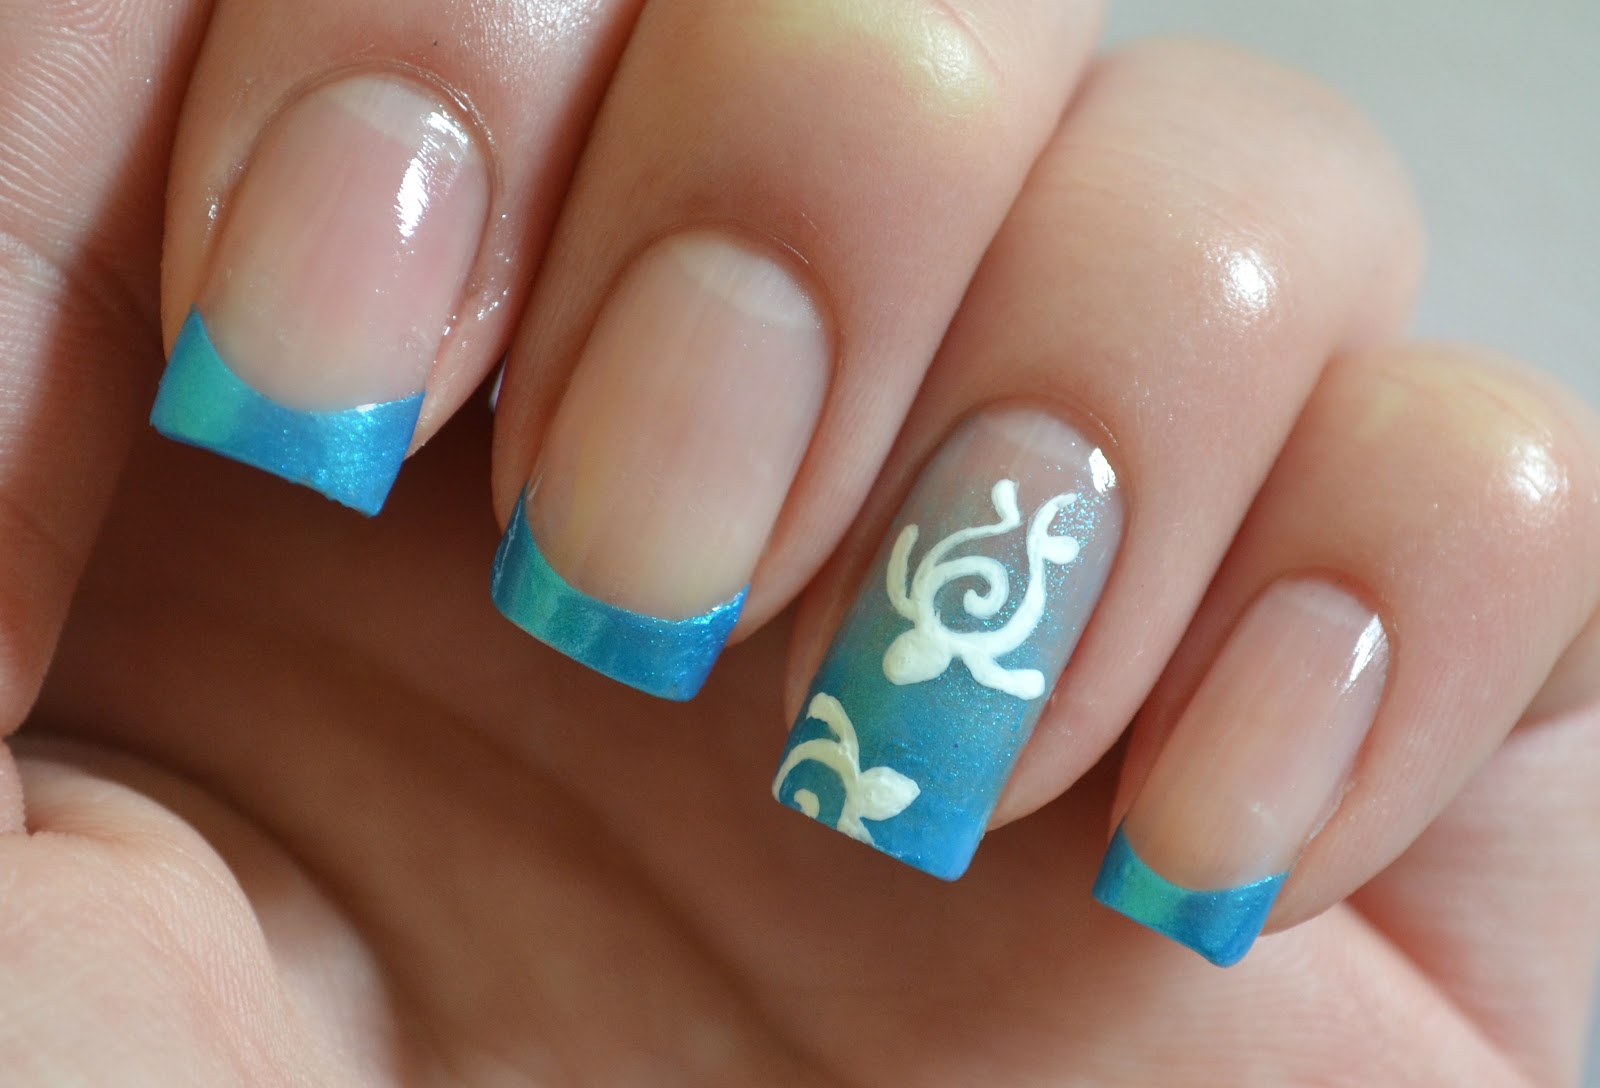 2. Beachy nail designs to try this summer - wide 2